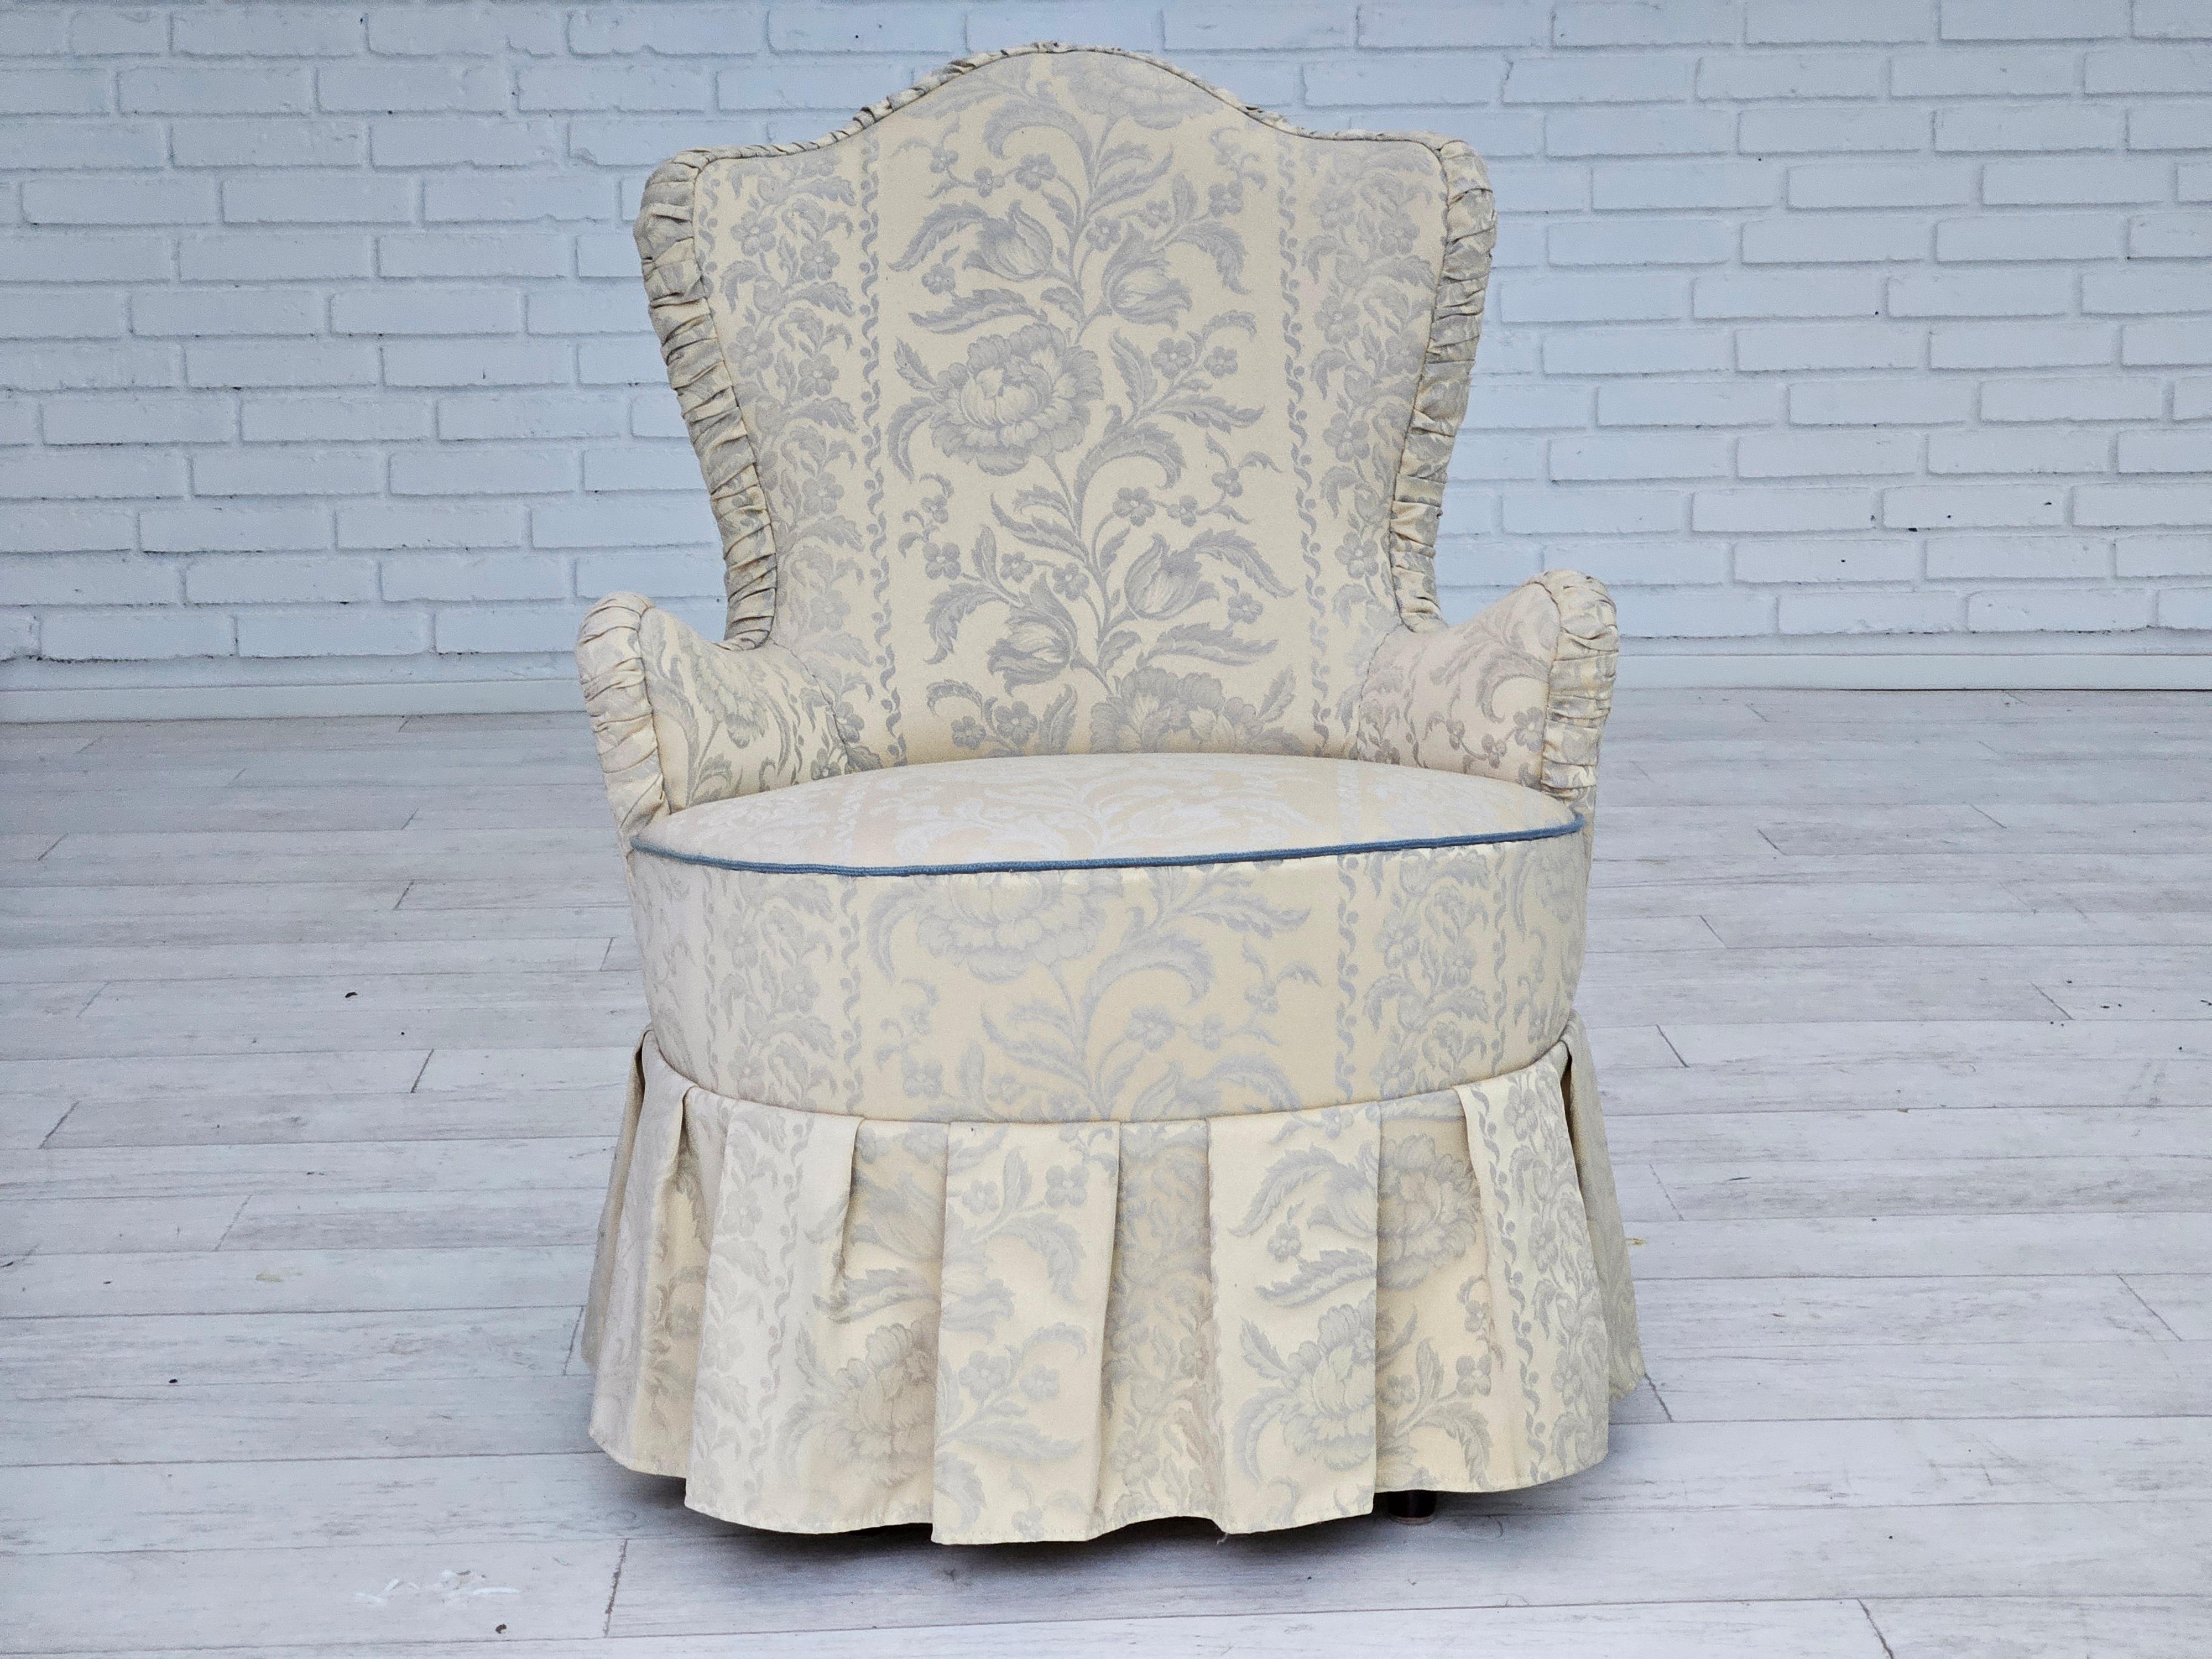 1950s, fauteuil Whiting, reupholstered, creamy/white floral fabric. en vente 1